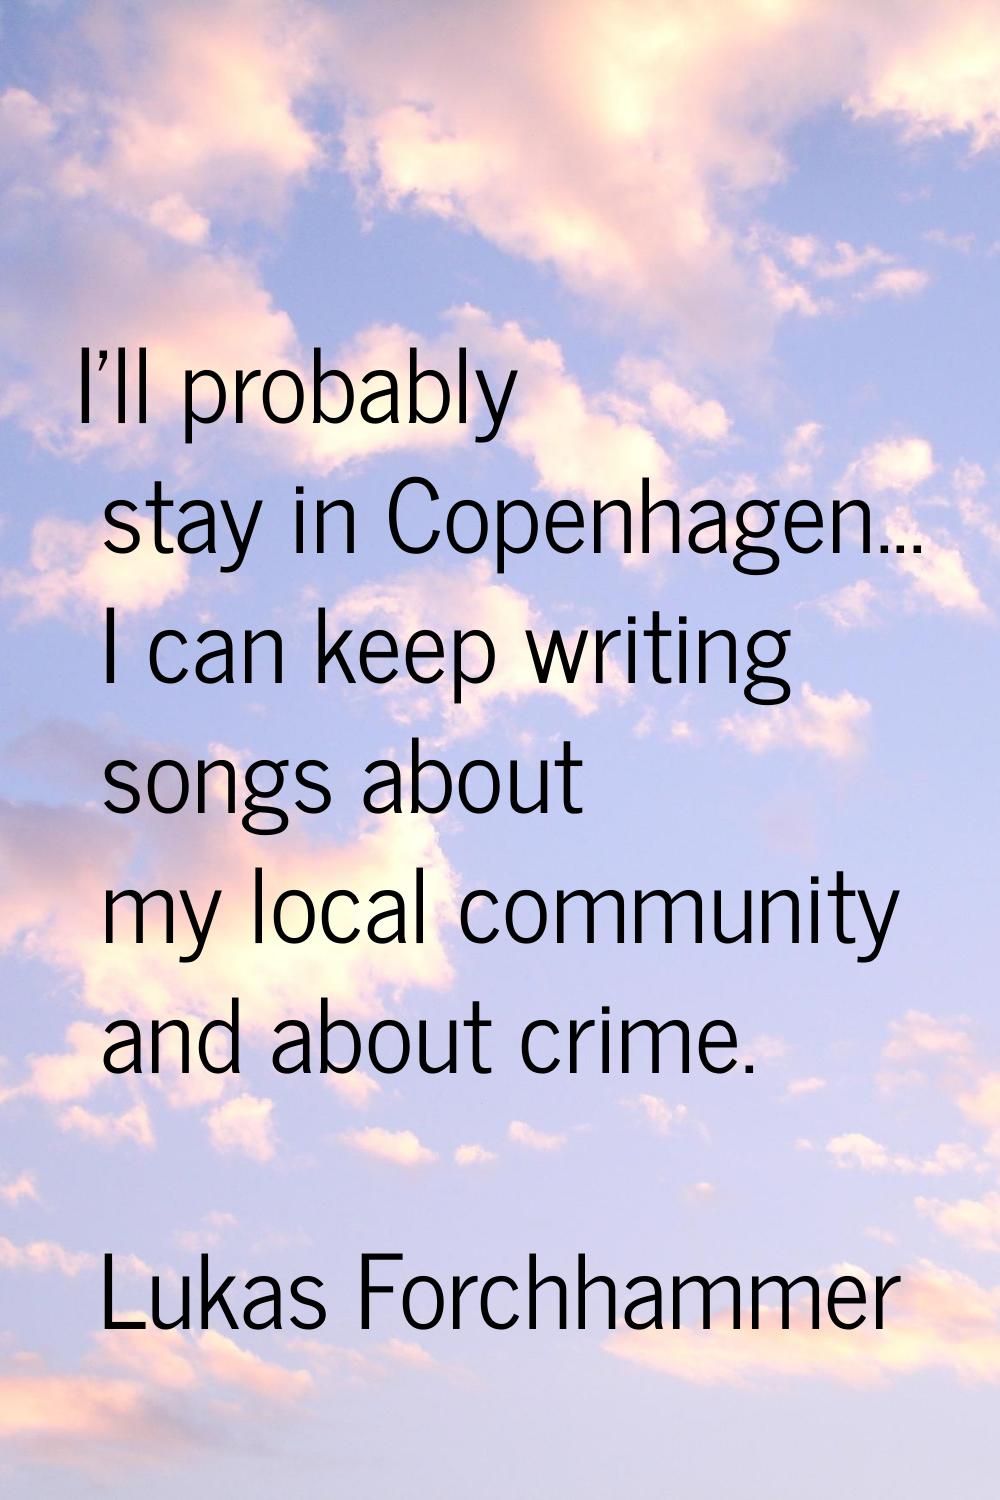 I'll probably stay in Copenhagen... I can keep writing songs about my local community and about cri